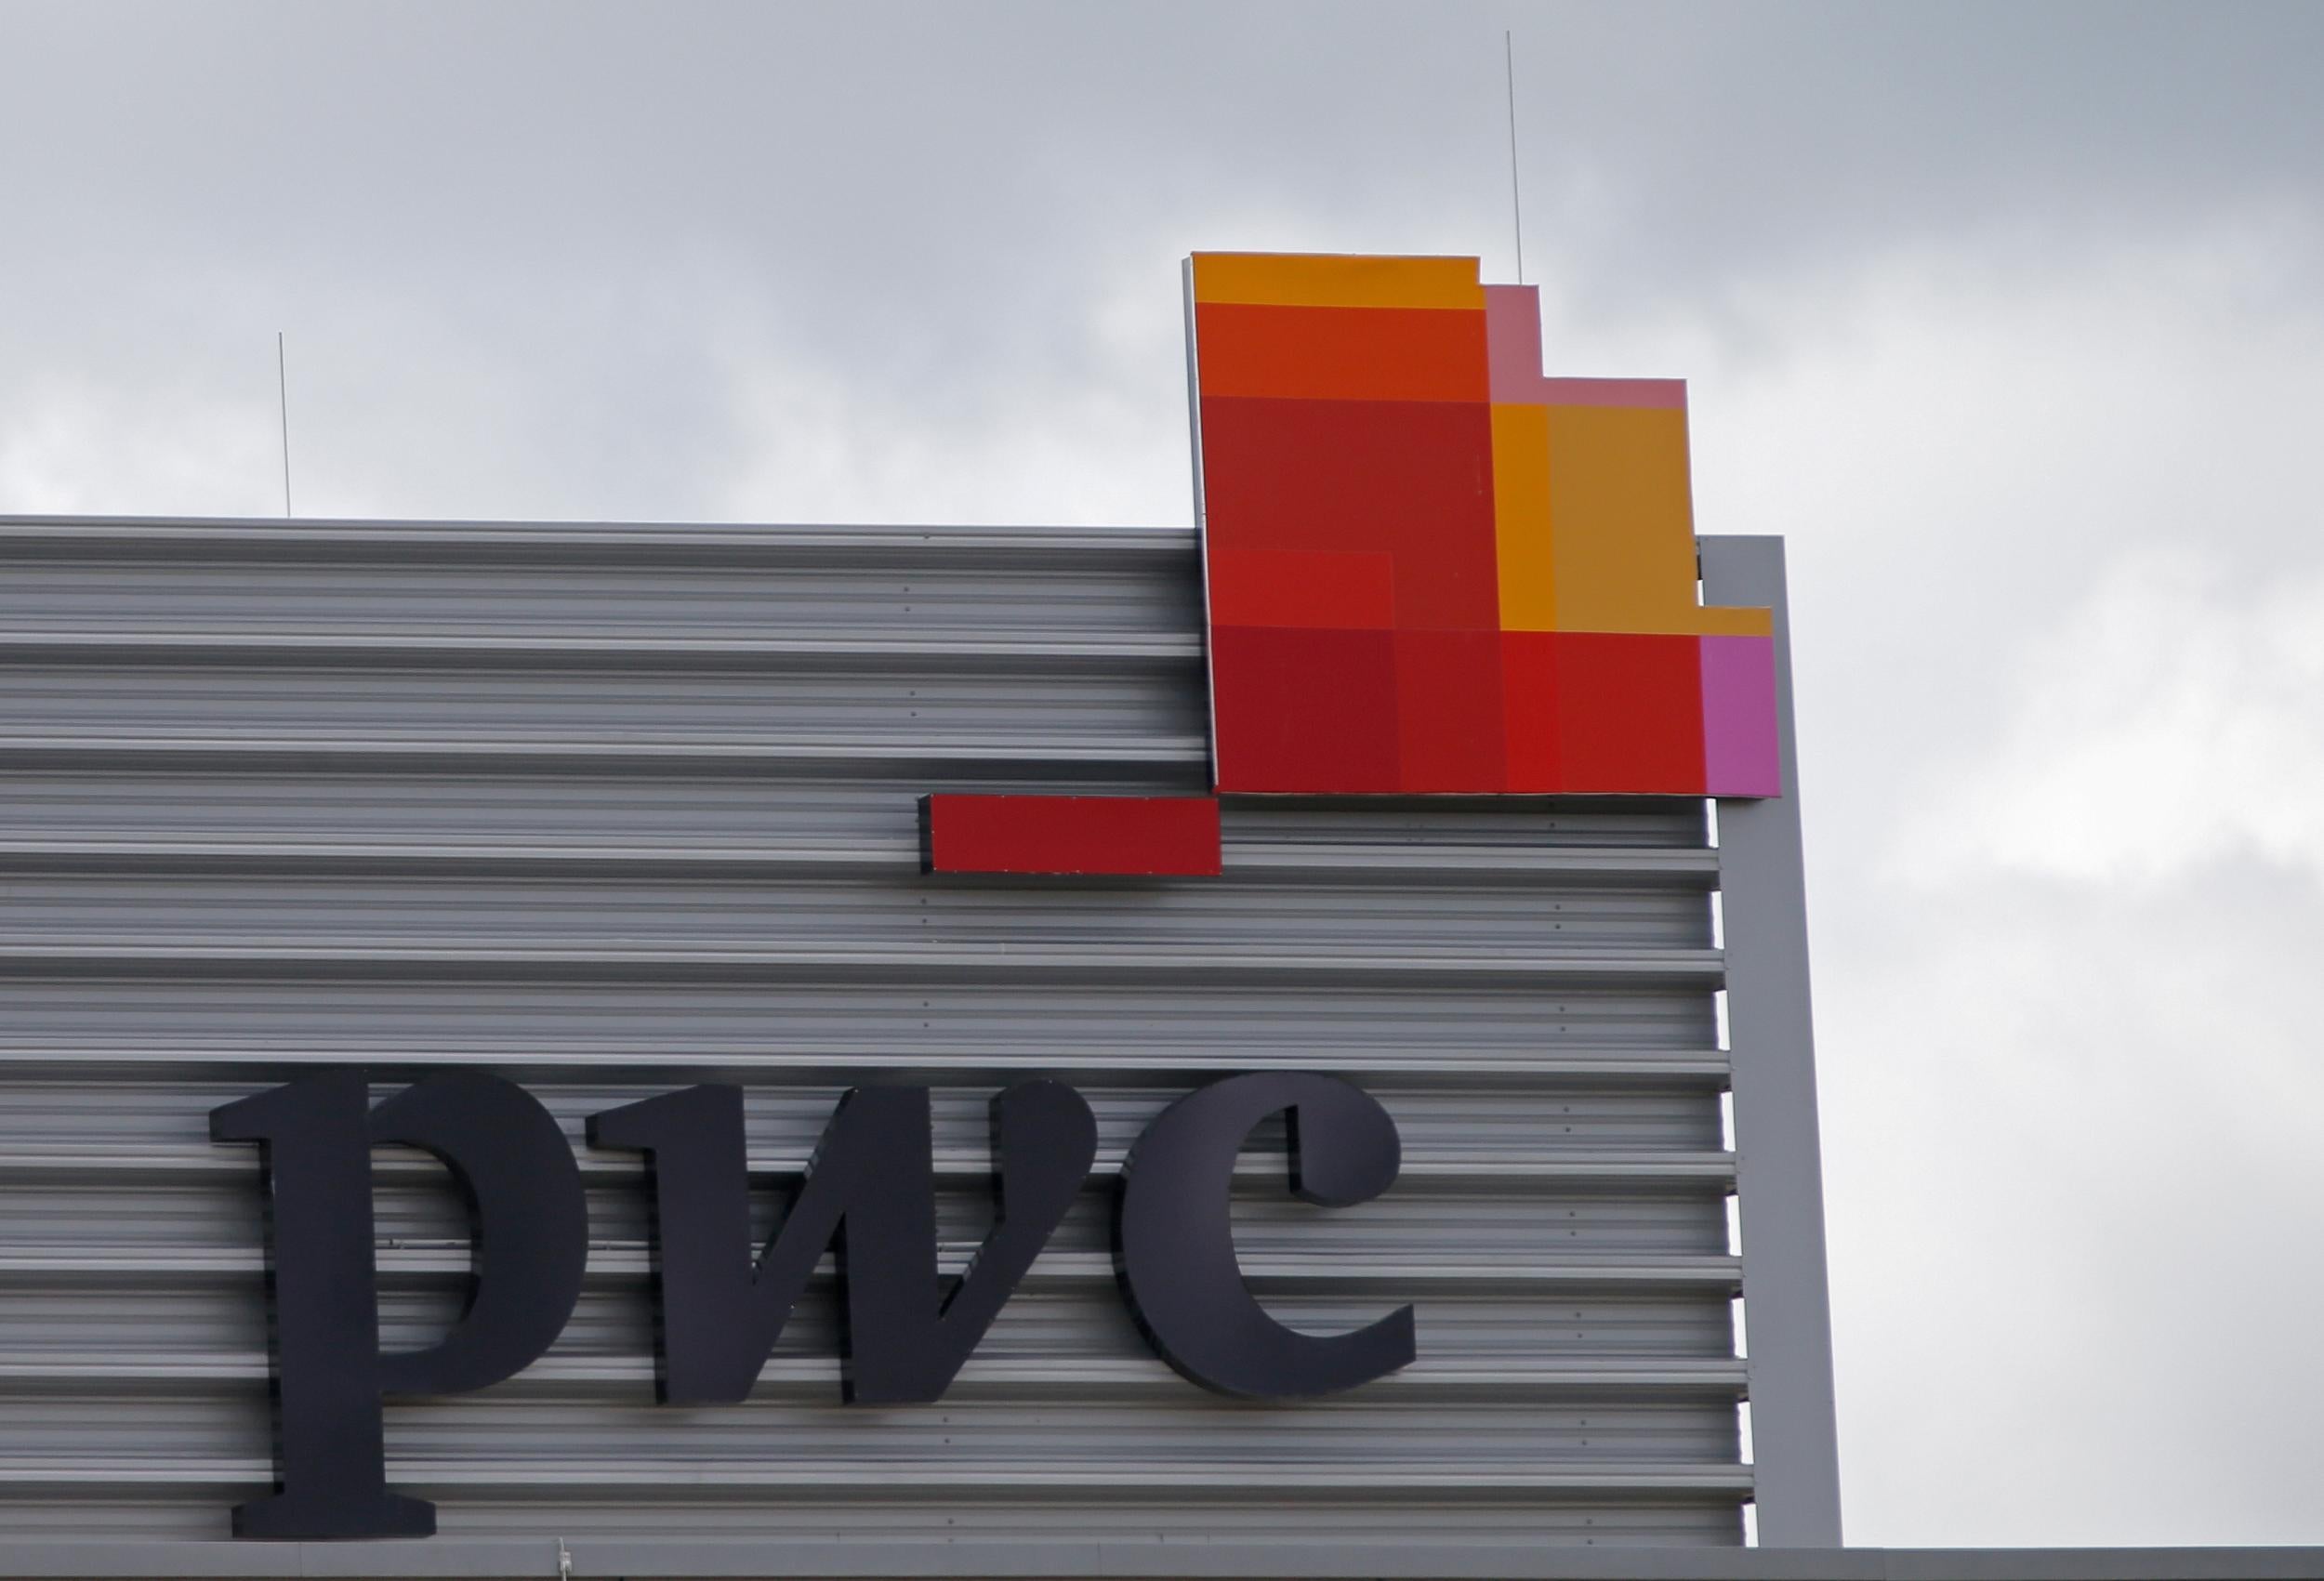 Diversity central? PwC has banned all male job shortlists, one of a number of progressive moves the firm has made